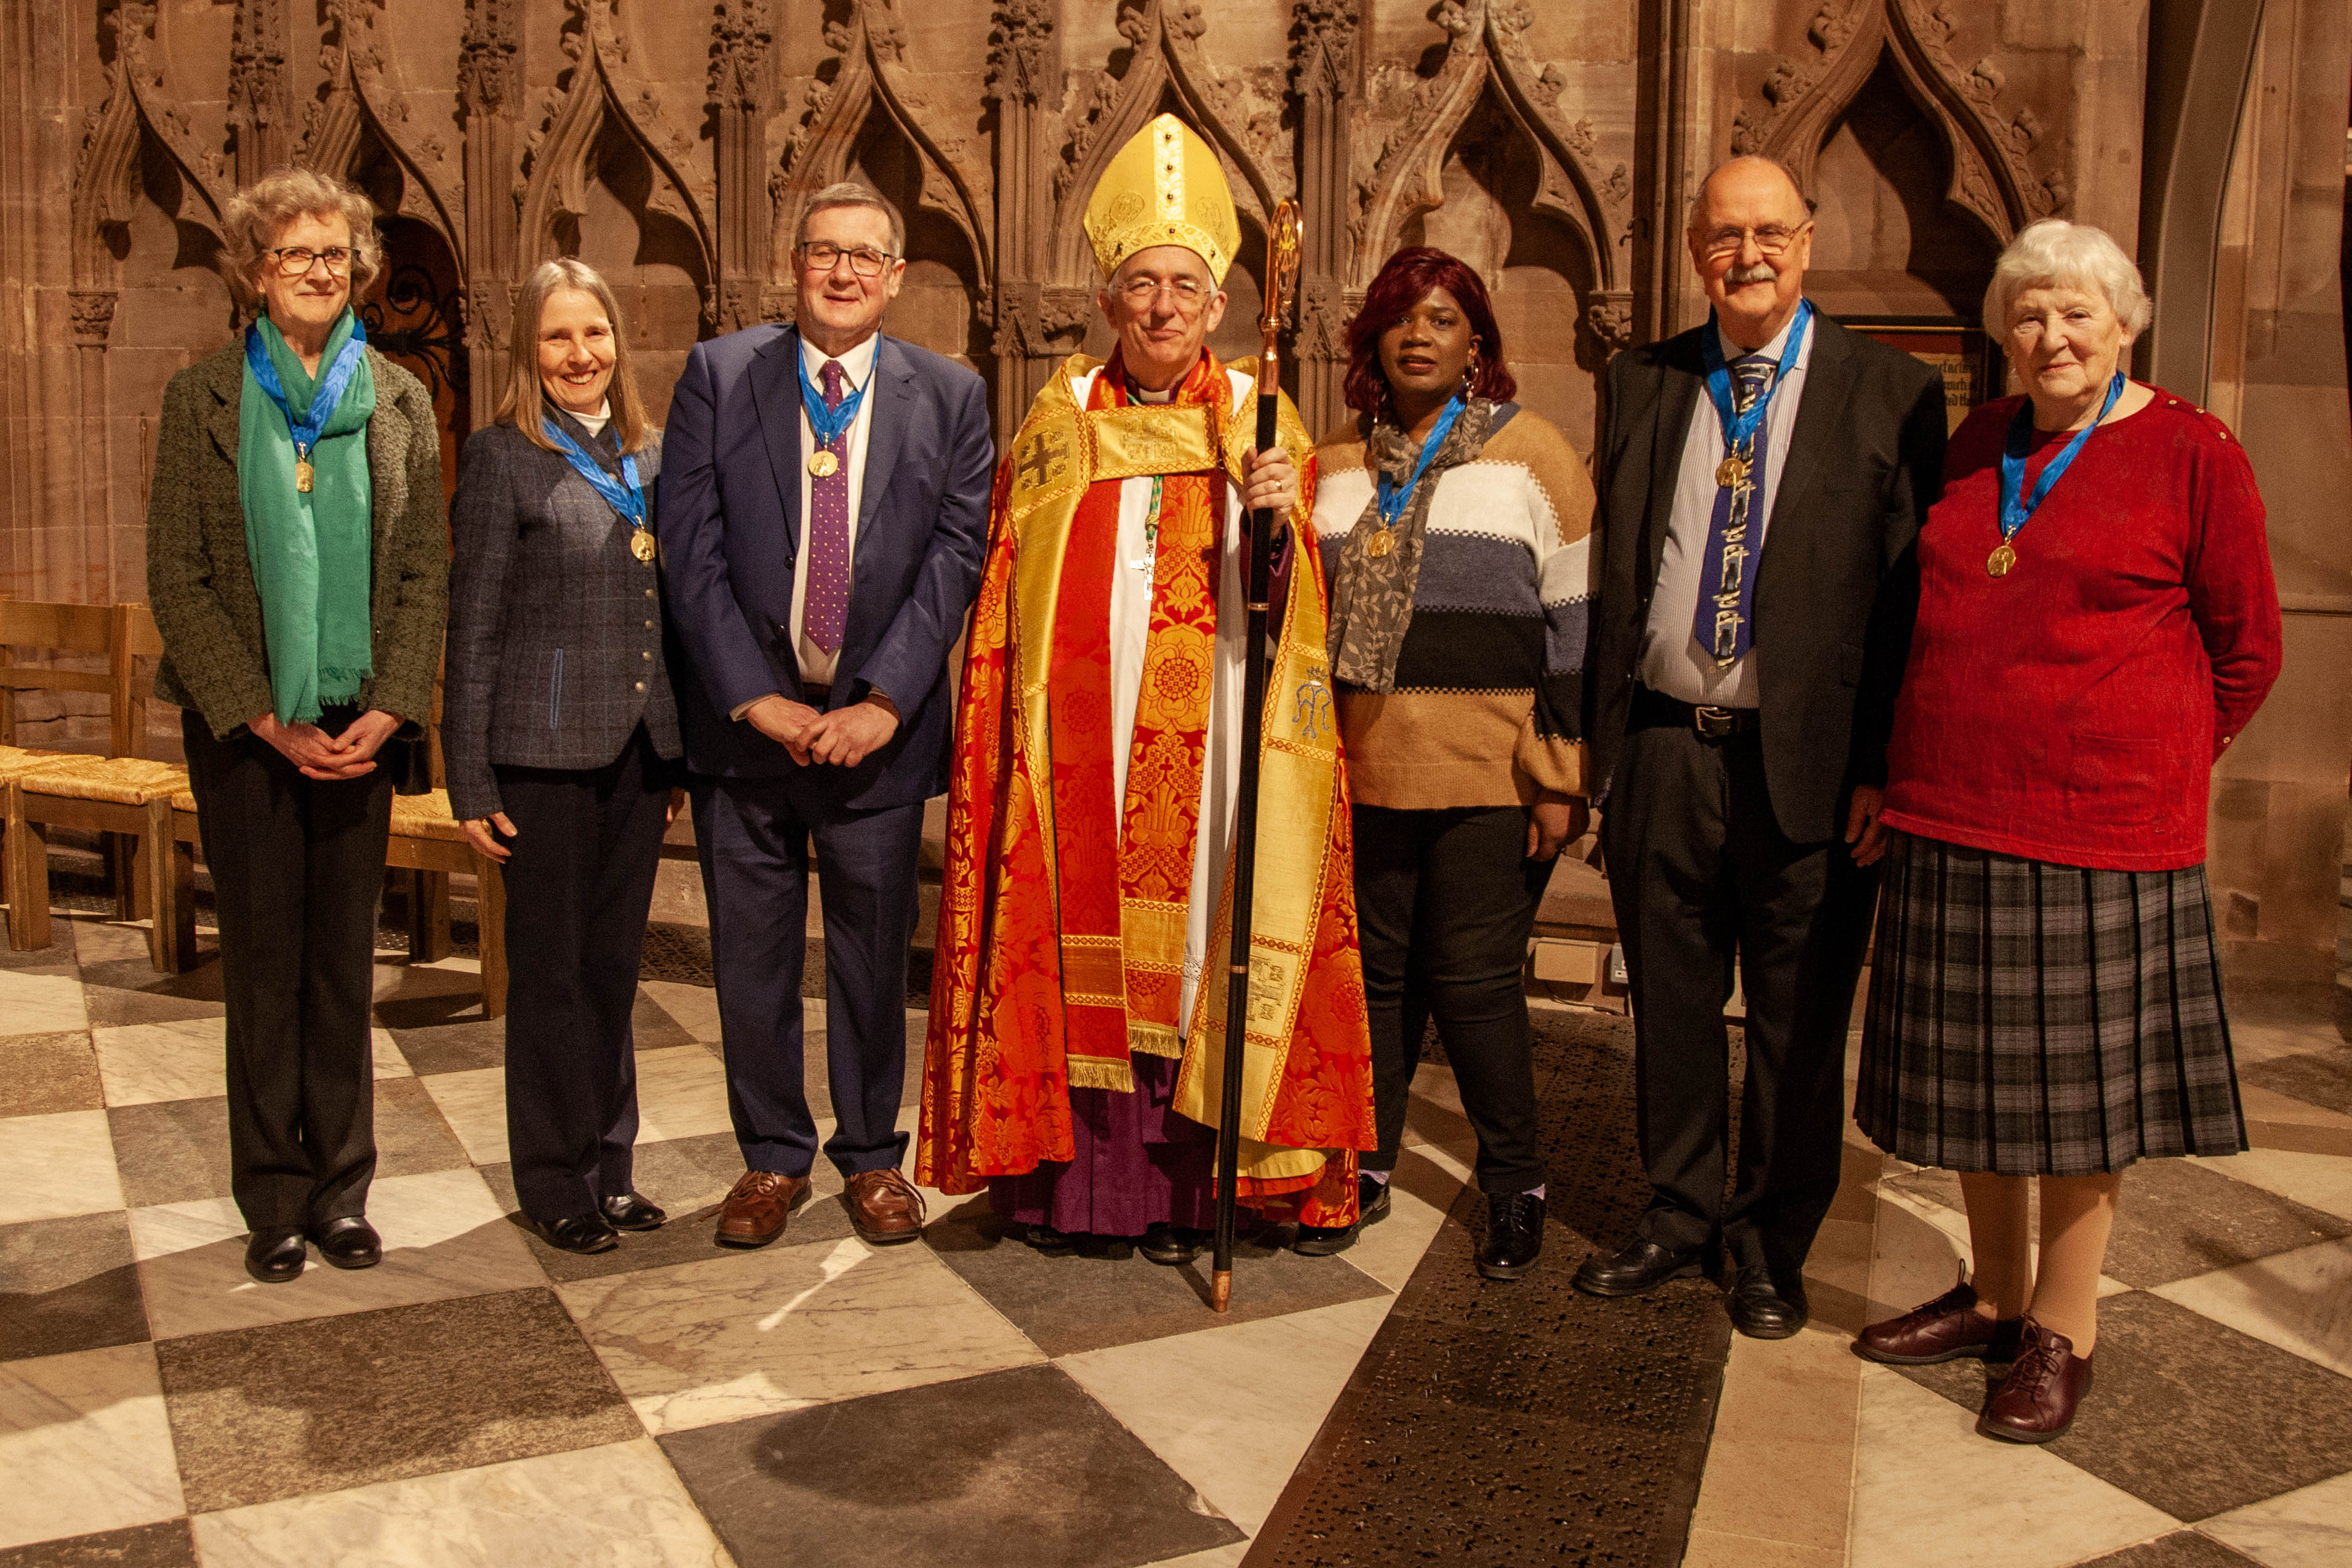 Recipients of the St Chad Medal - (l-r) Mithra Tonking, Claire Crackett, Pete Harris, Bishop Michael, Angela Bernard, Roger Marsh, Ruth Bull